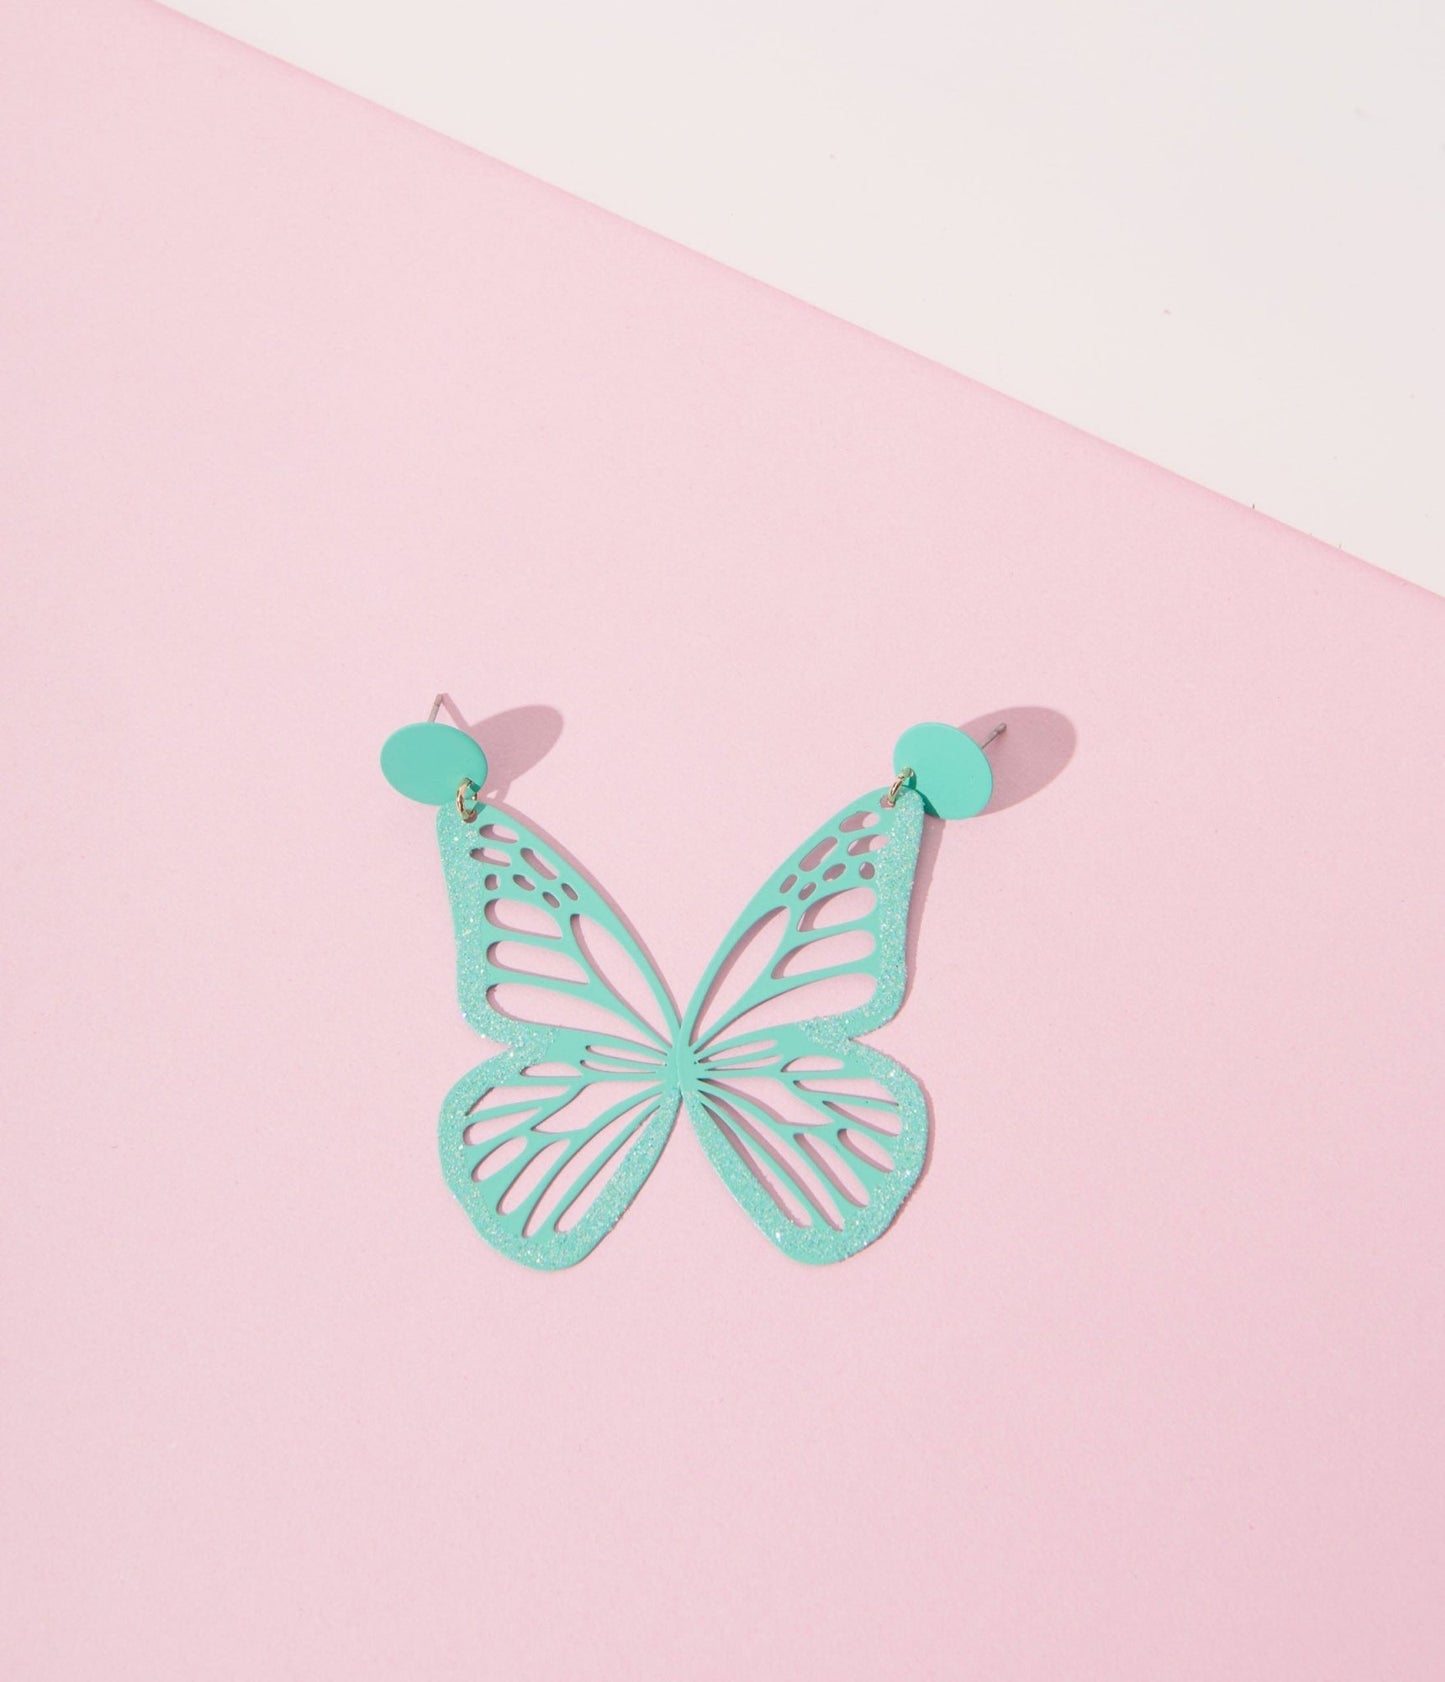 Teal Glitter Butterfly Wing Earrings - Unique Vintage - Womens, ACCESSORIES, JEWELRY